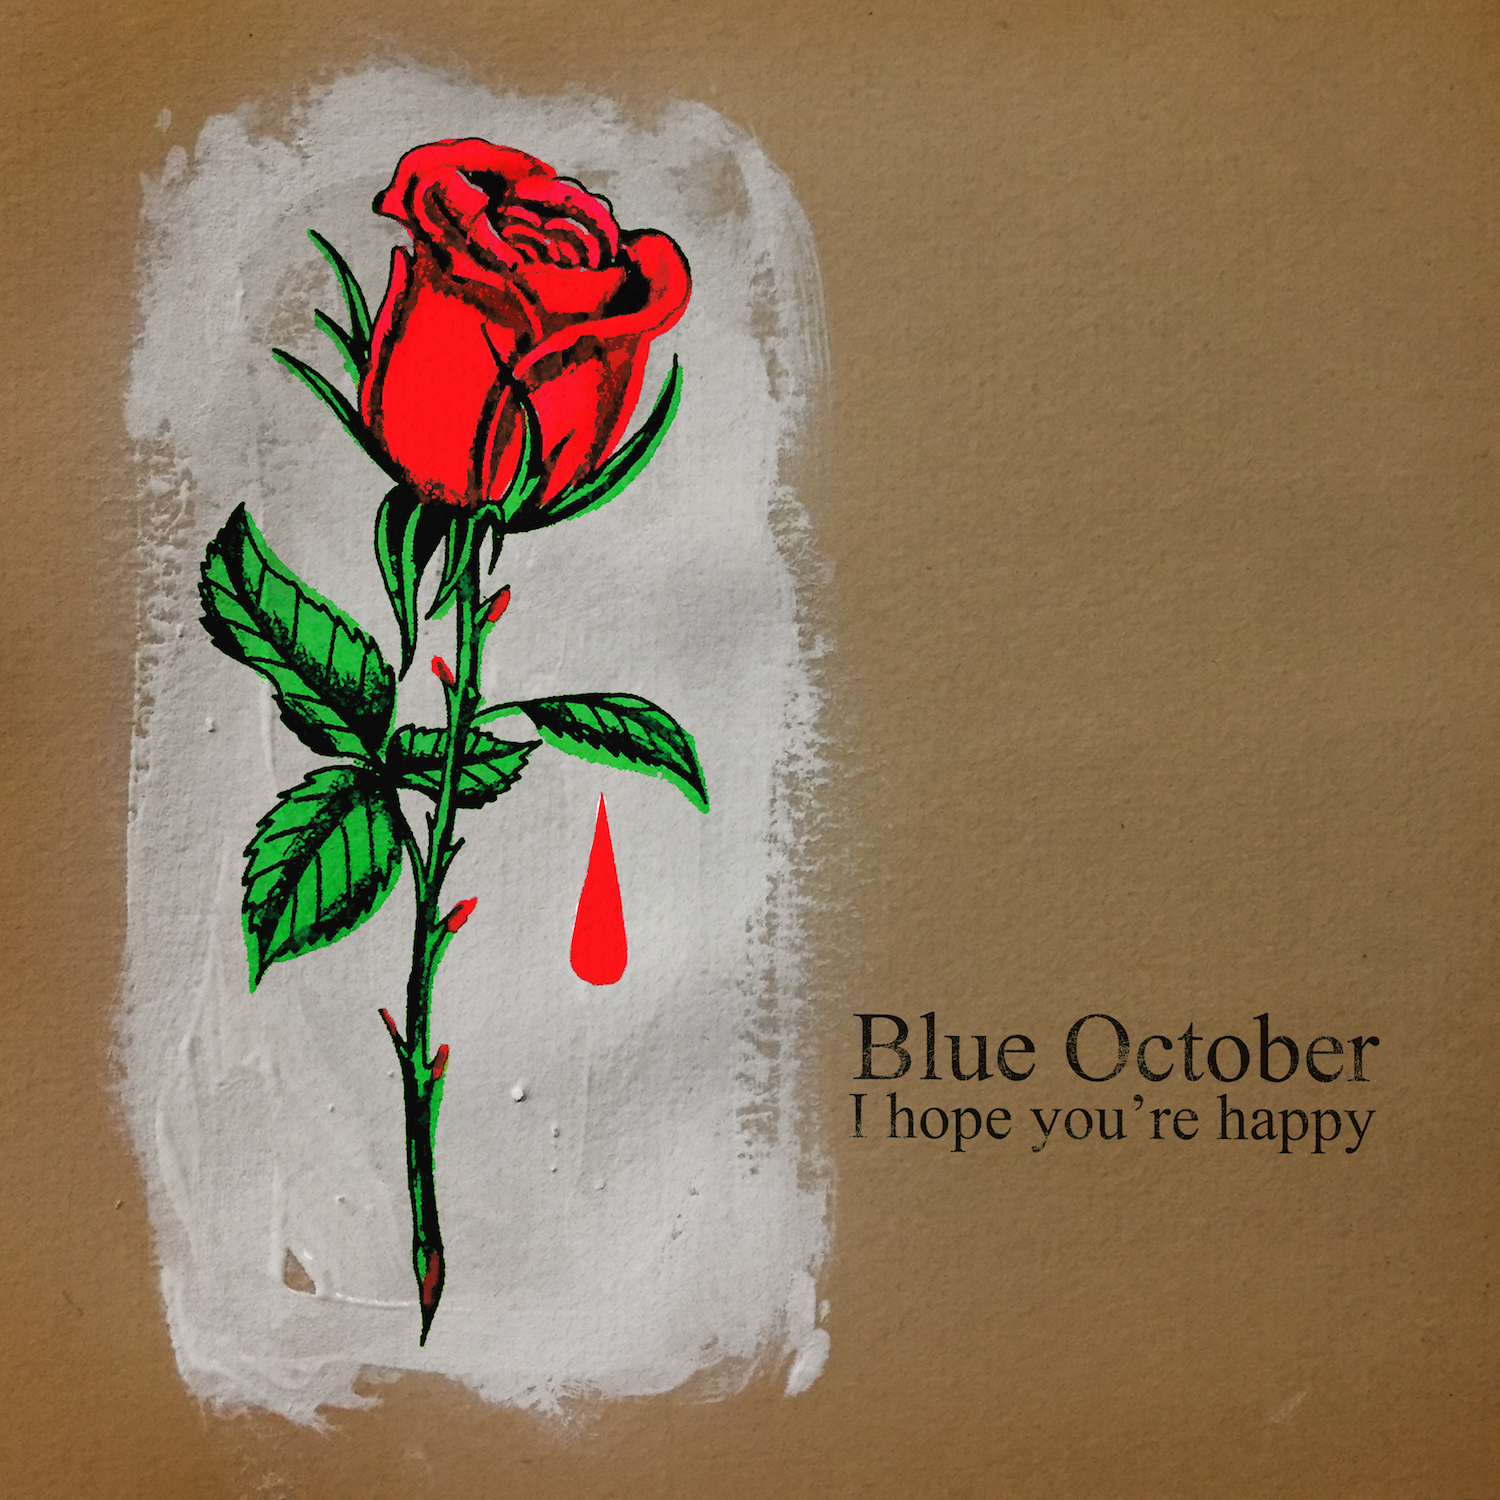 I hope you are happy. Blue October. Blue October i hope you're Happy. Группа Blue October. Blue October обложки.